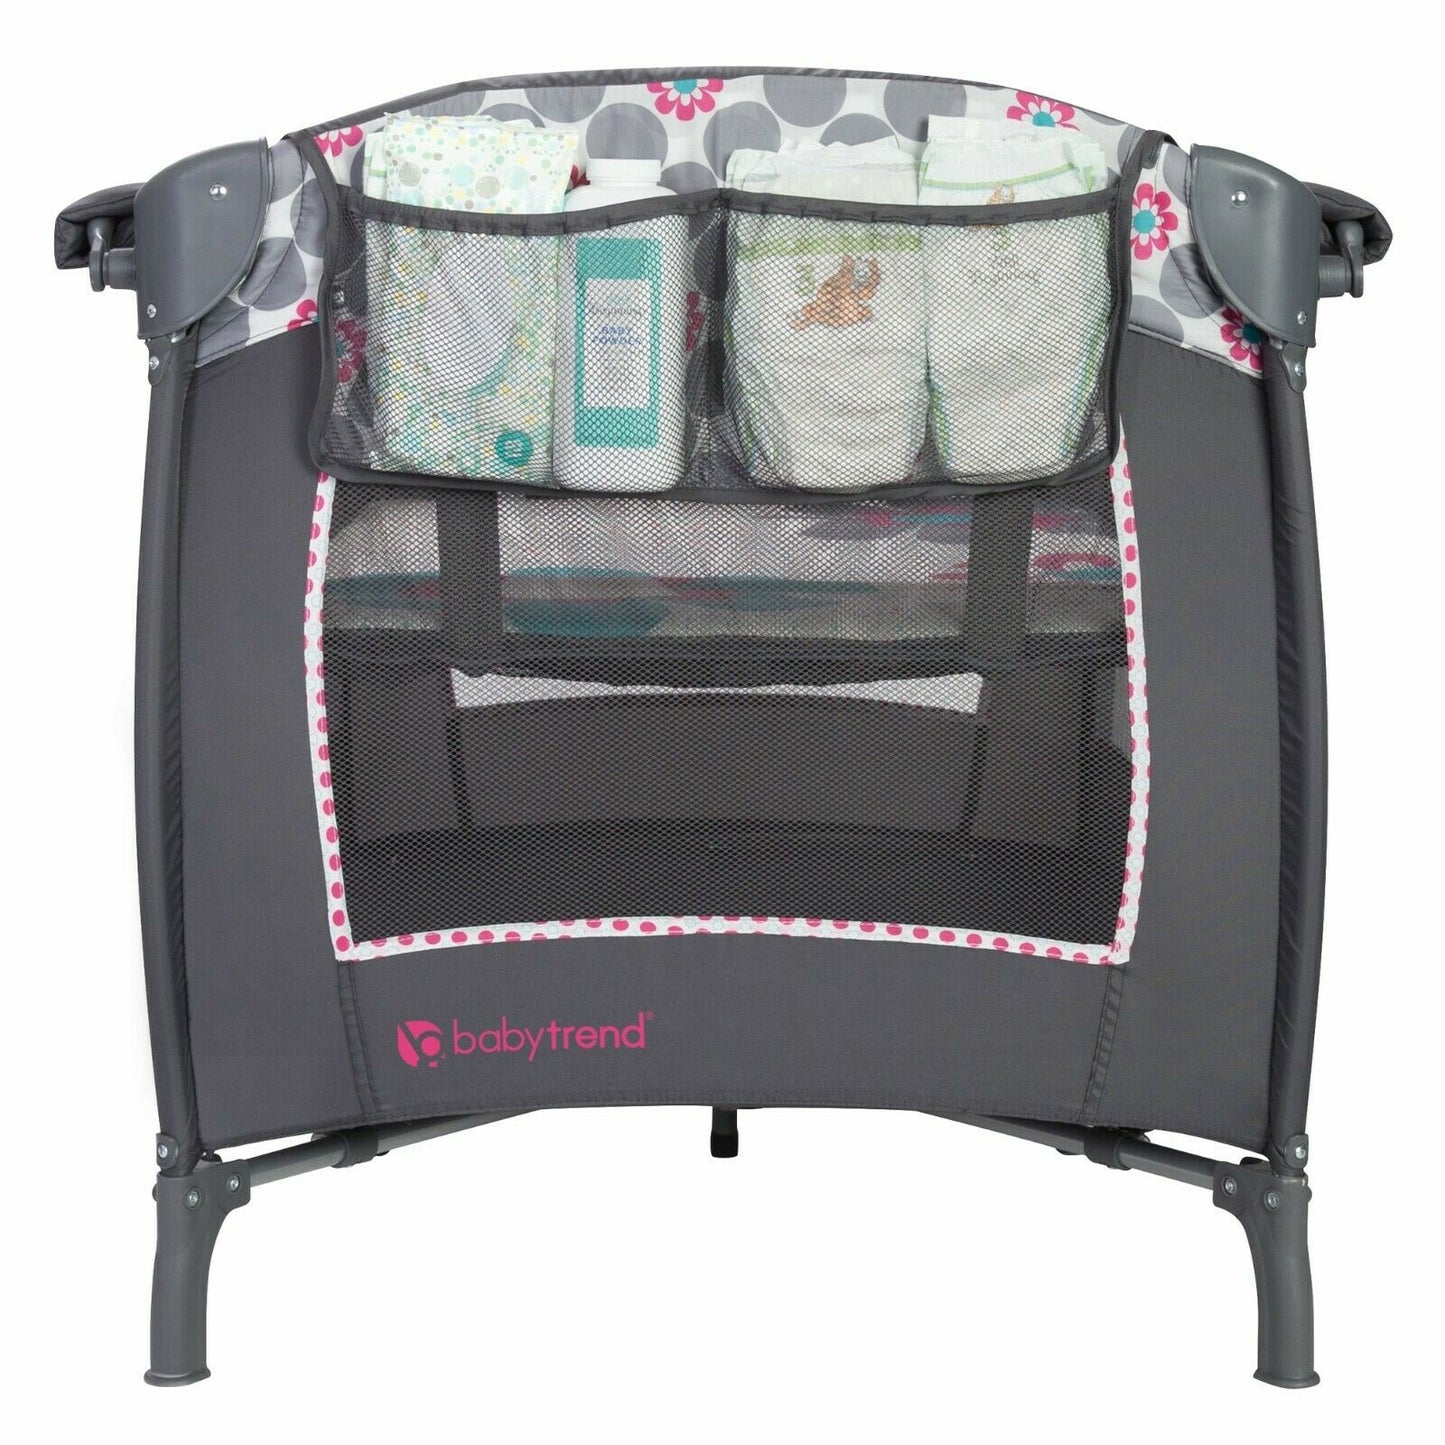 Baby Strollers with Car Seat Travel High Chair Infant Playard Crib Set Combo